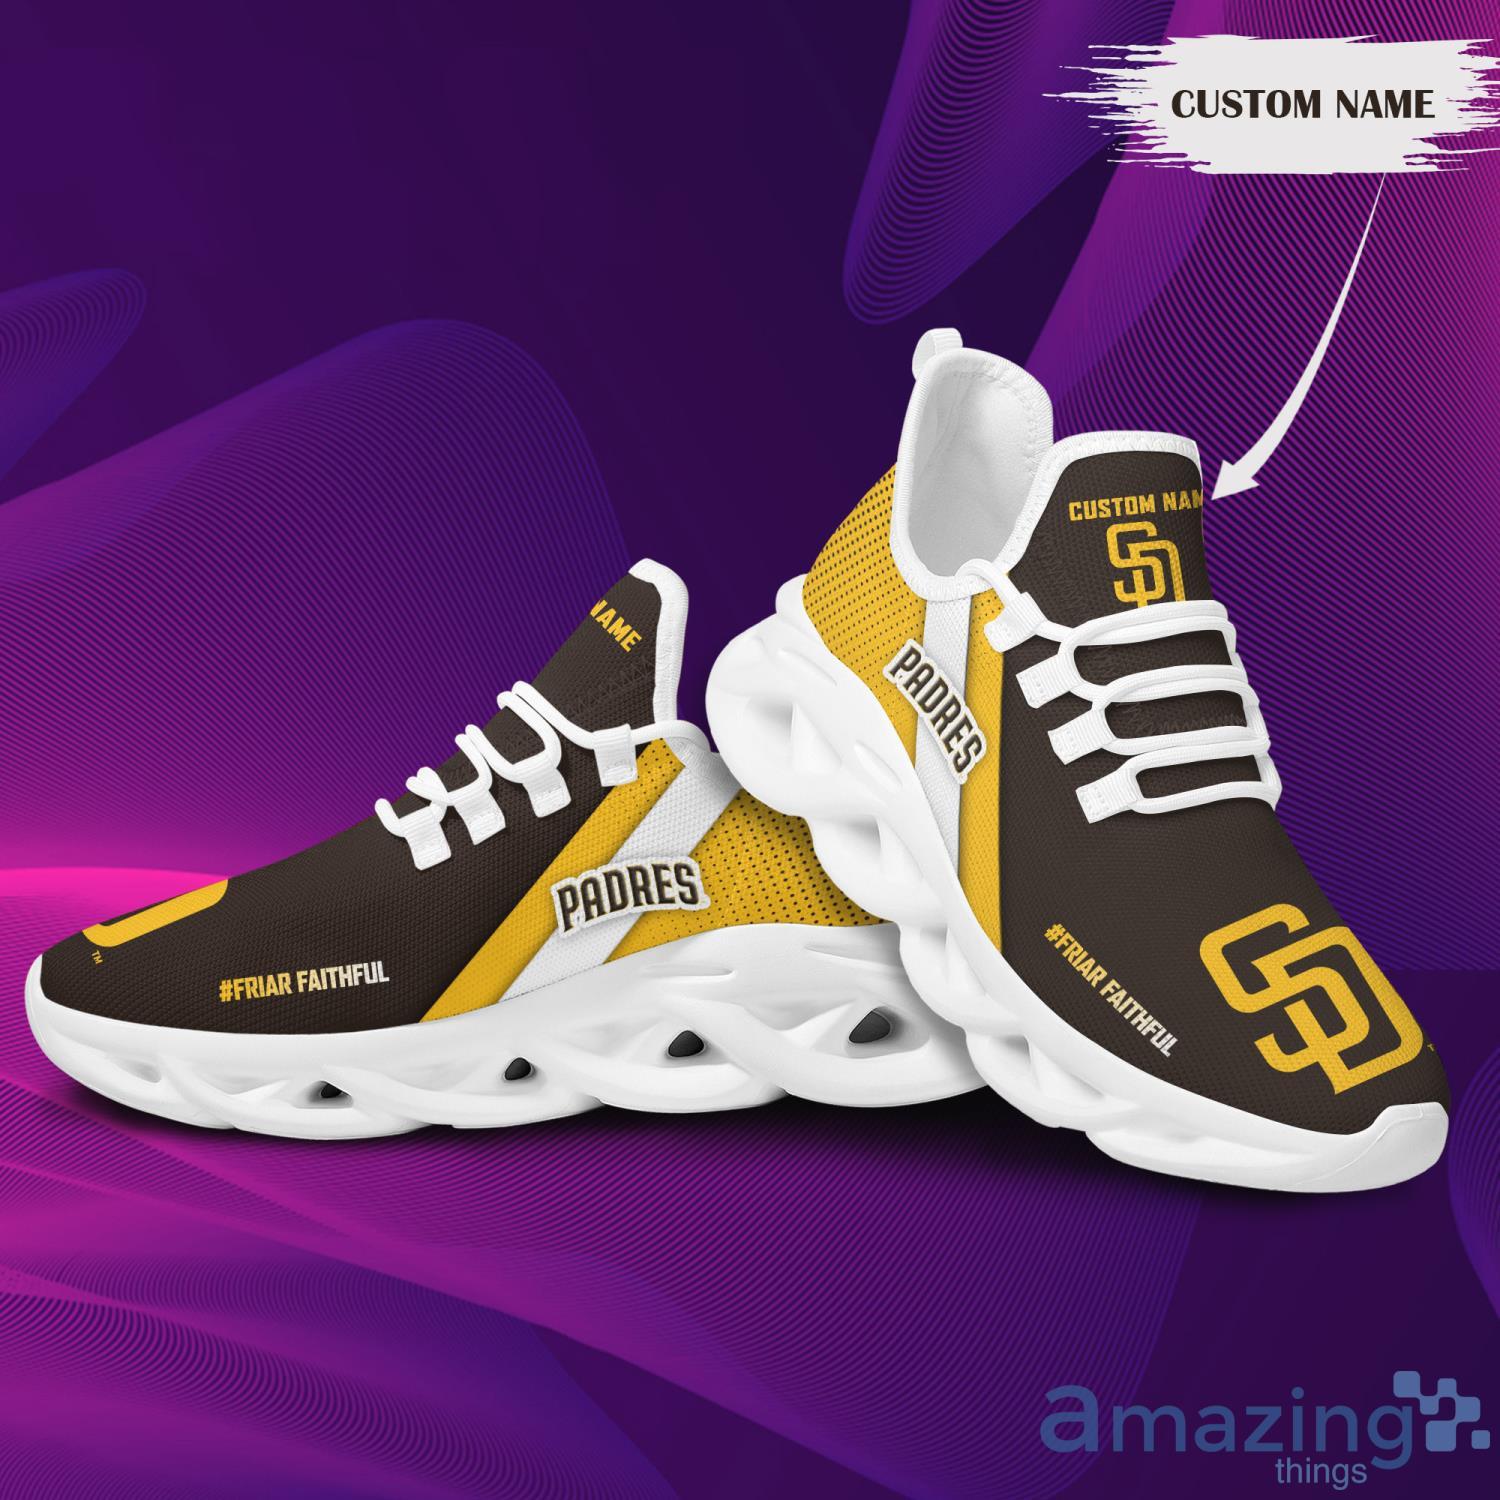 Trainer's shoes - New City Connect leak? : r/Padres